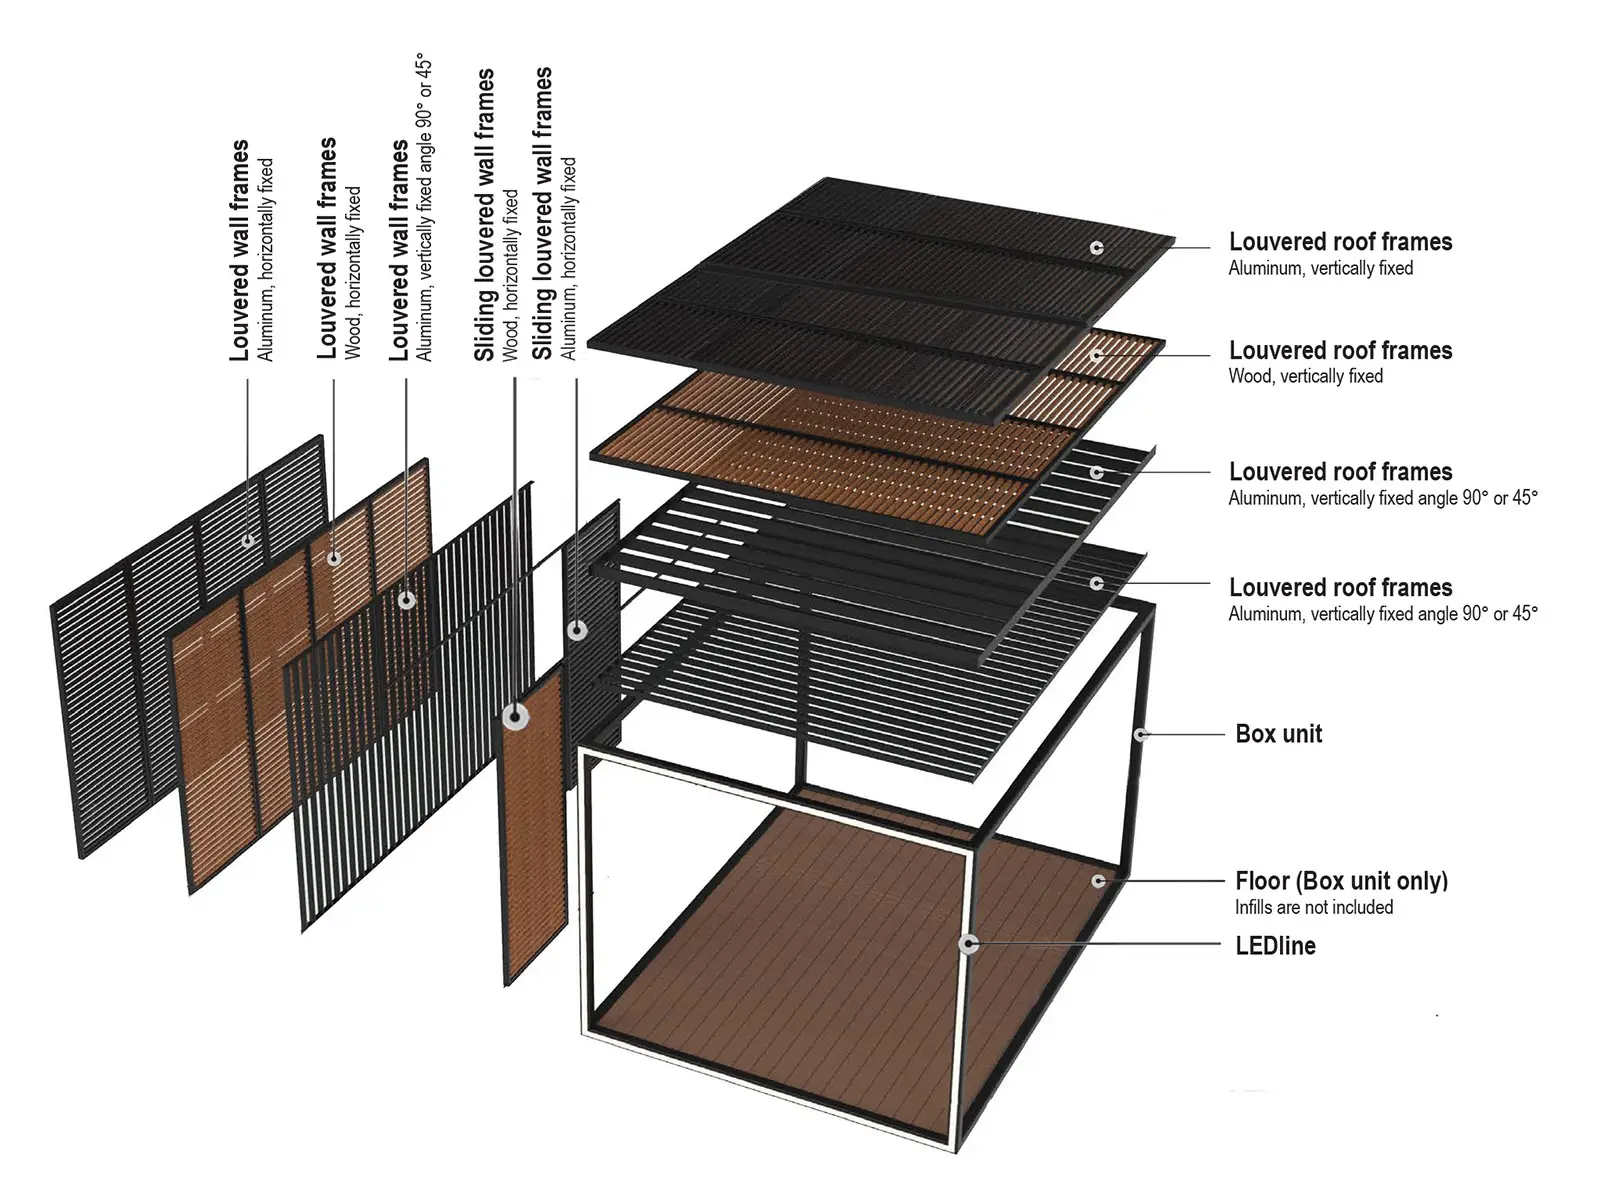 options for sides and roof on pure pergola